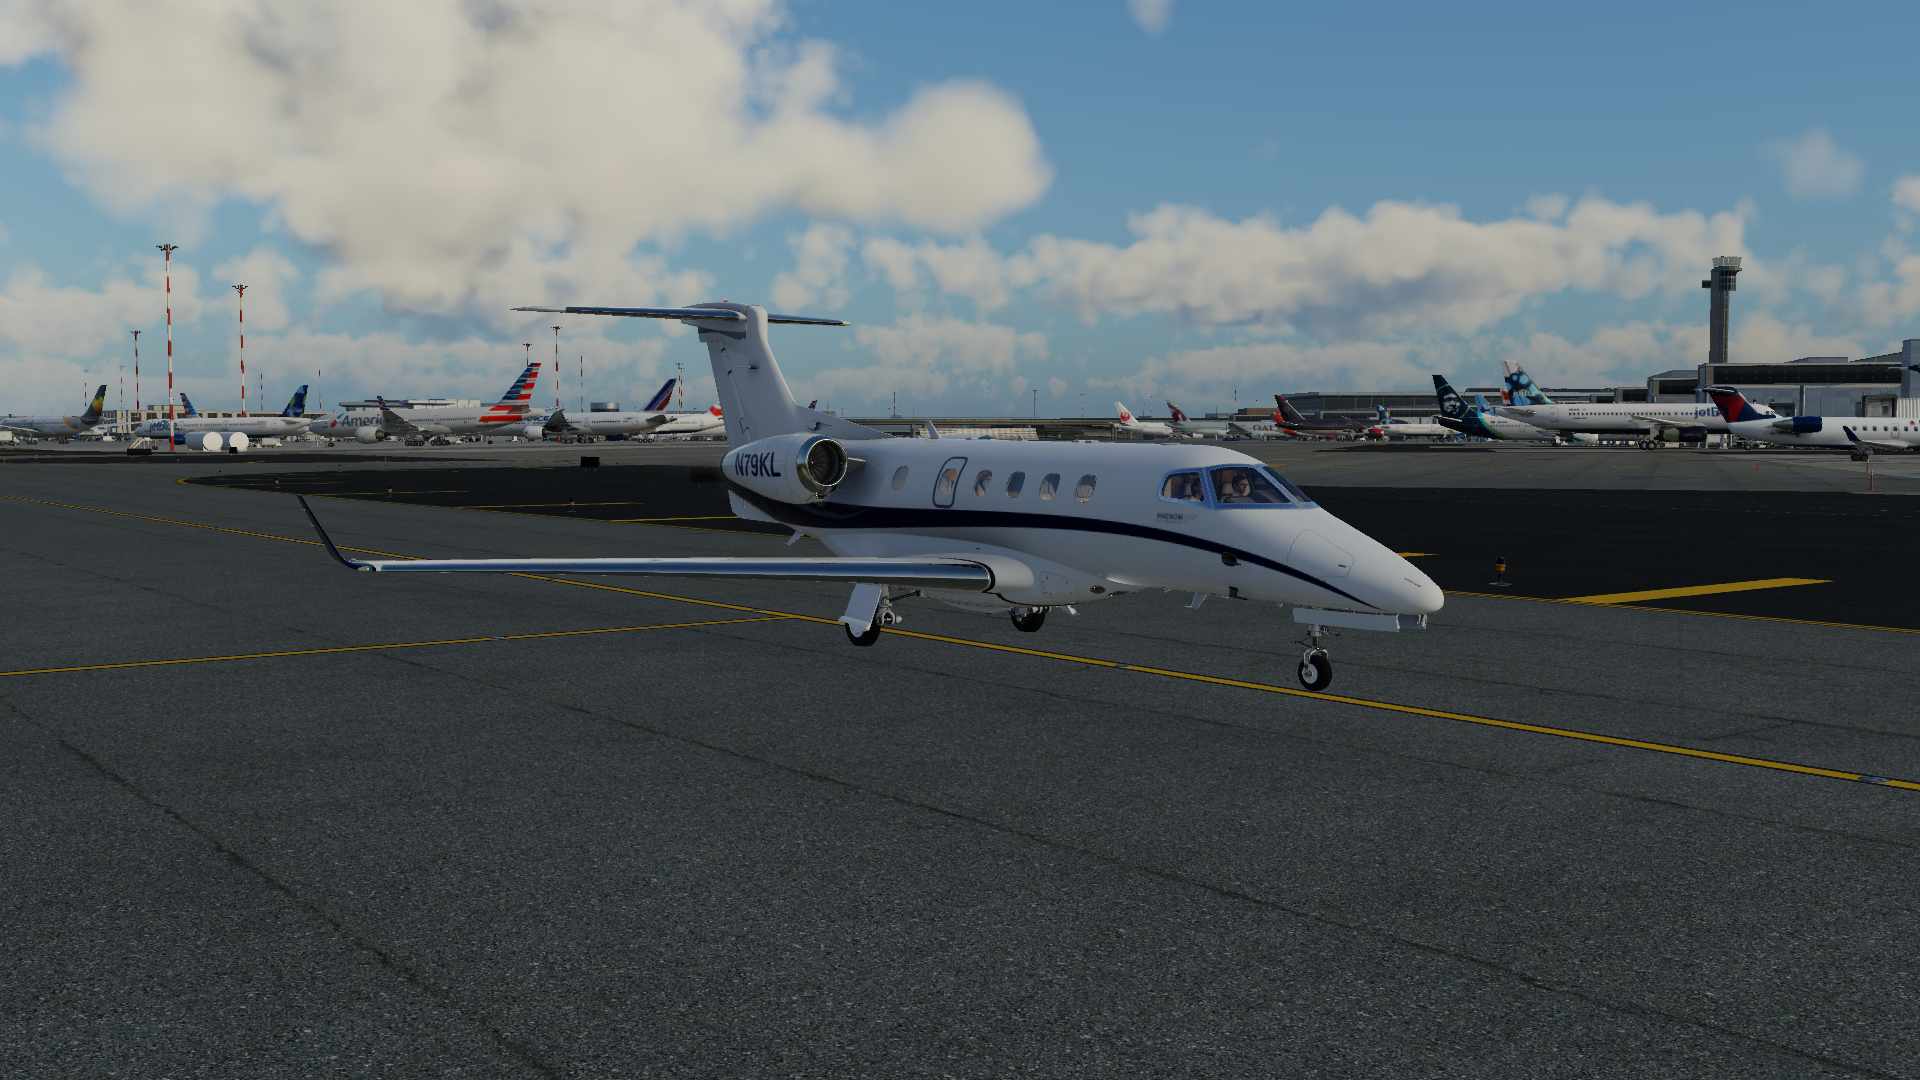 MEC-263 at KJFK taxiing for departure heading to KVRB.